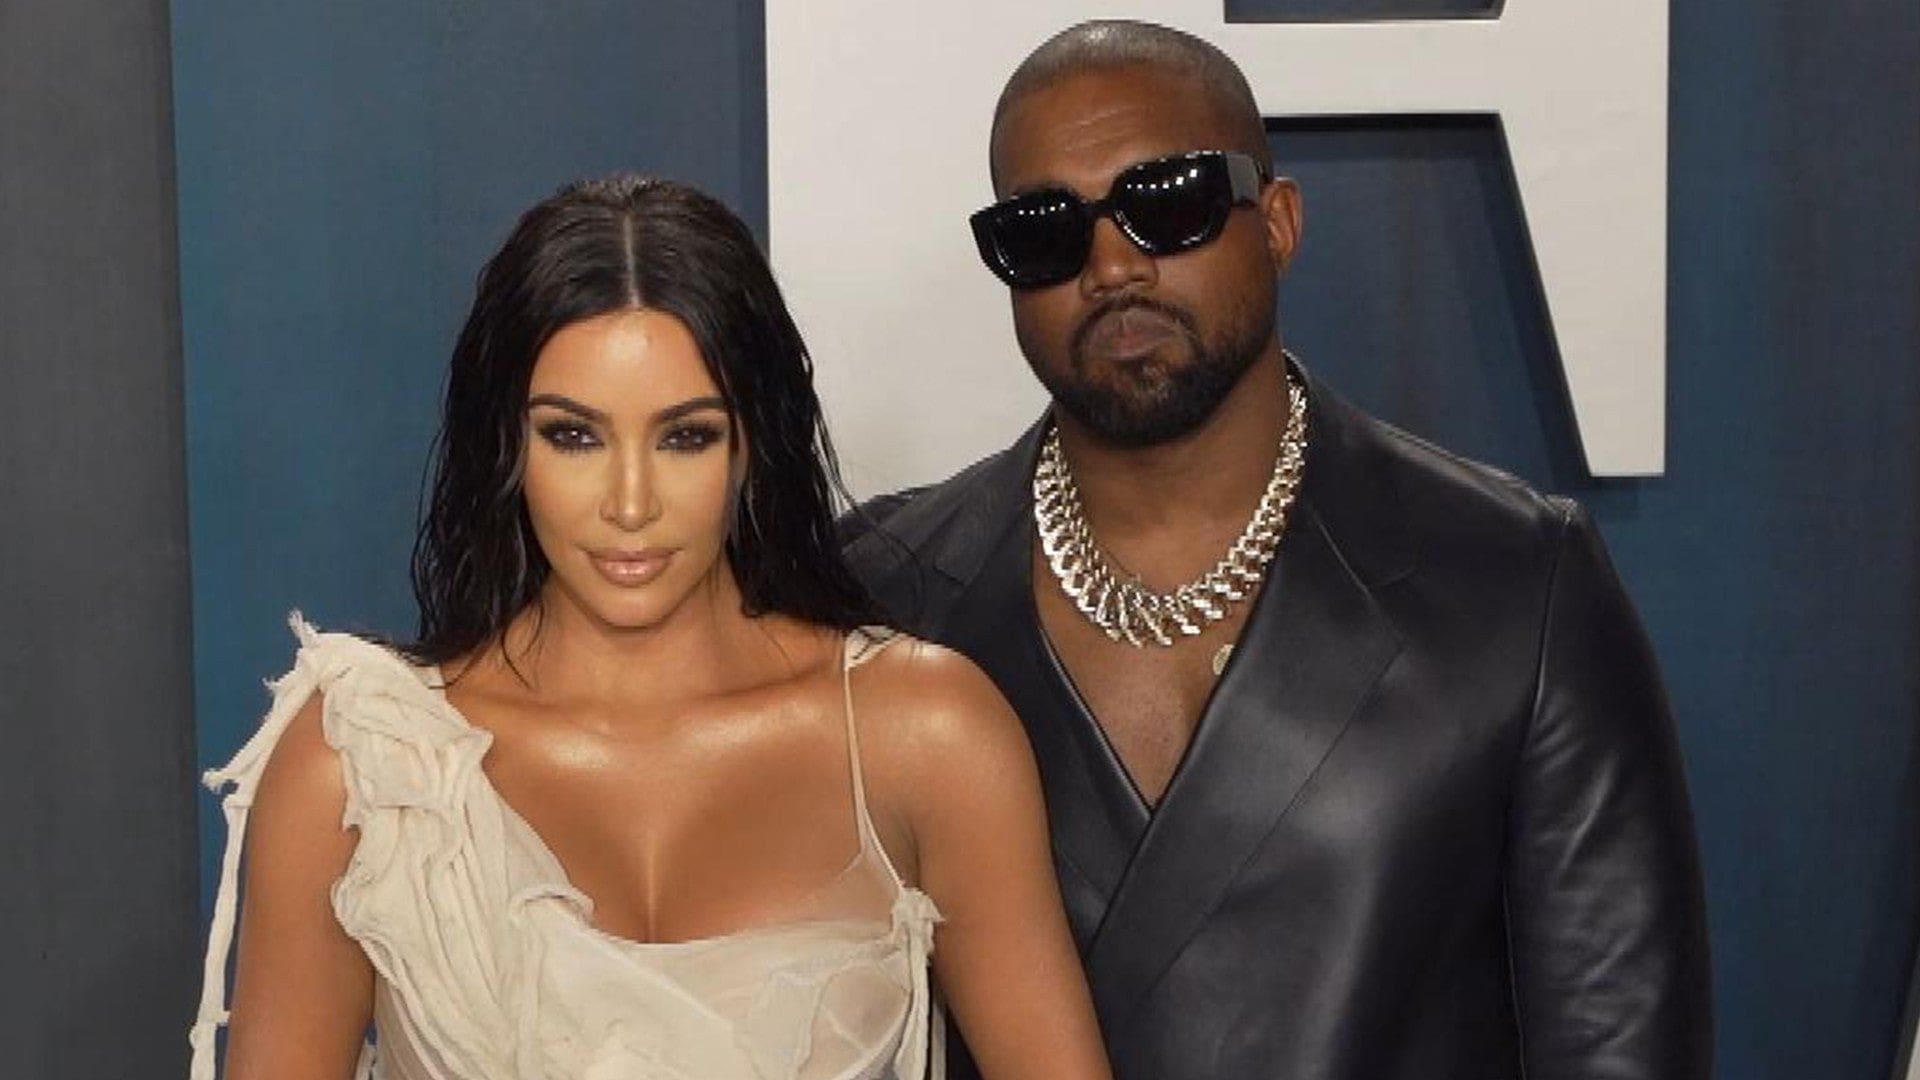 Kim Kardashian And Kanye West Take A Vacay Together - Are They Trying To Work Things Out?